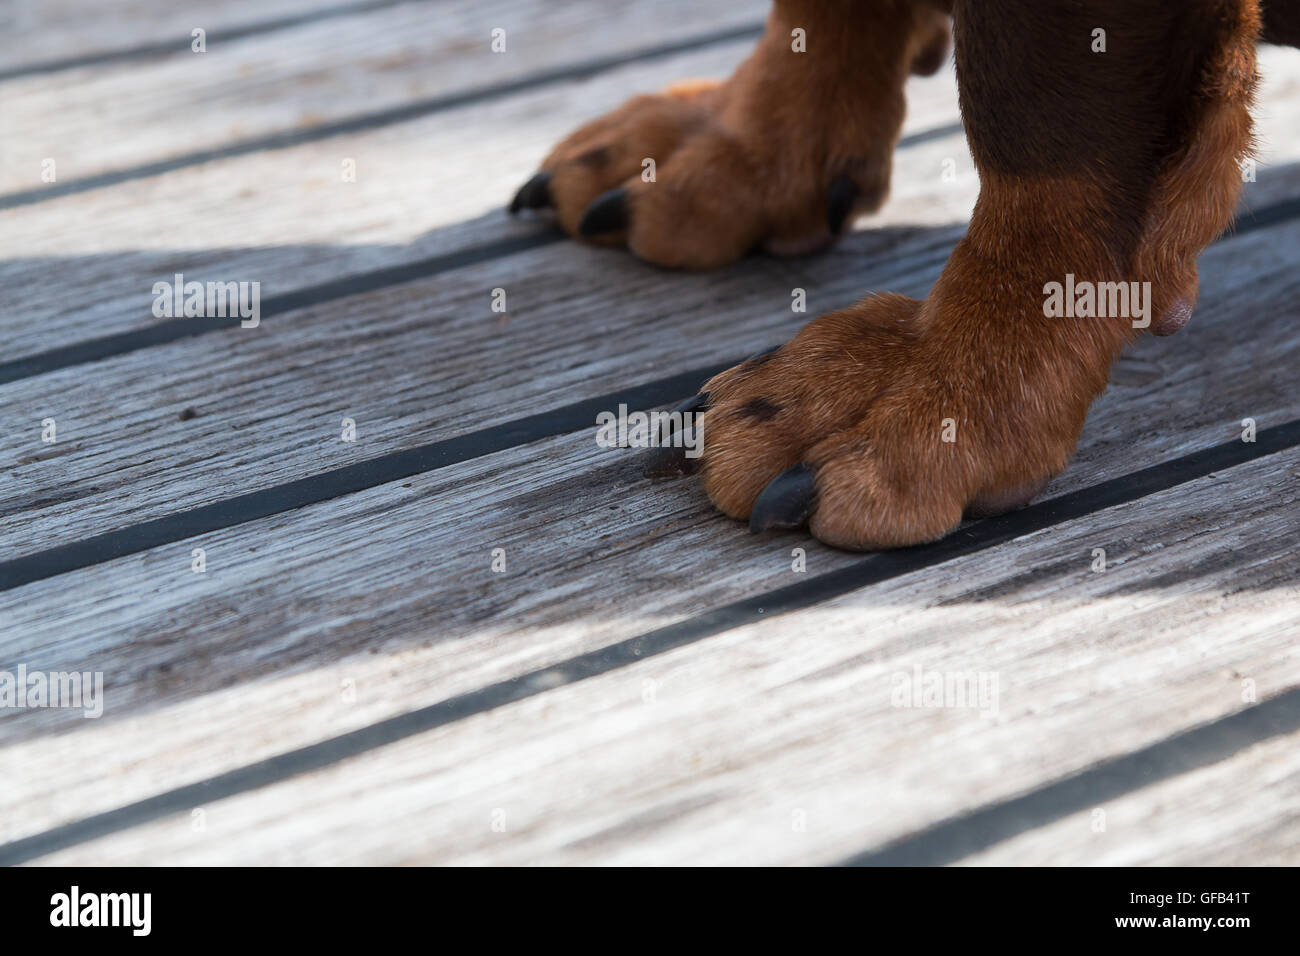 Paws of a big brown dog on the wooden floor. Stock Photo